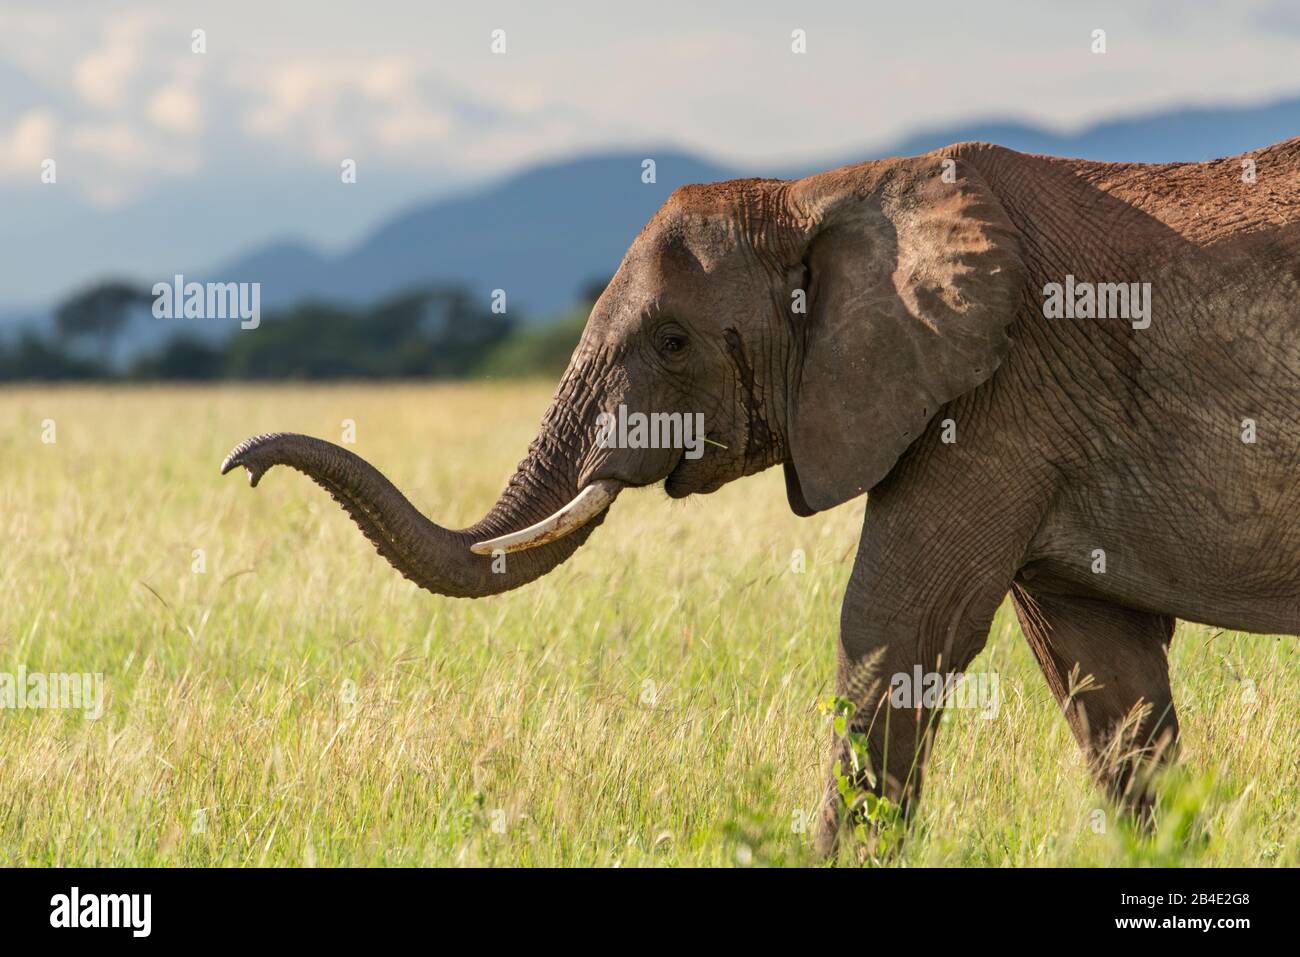 Large African Elephant With Big Ears And And Long Trunk Stock Photo,  Picture and Royalty Free Image. Image 11918309.